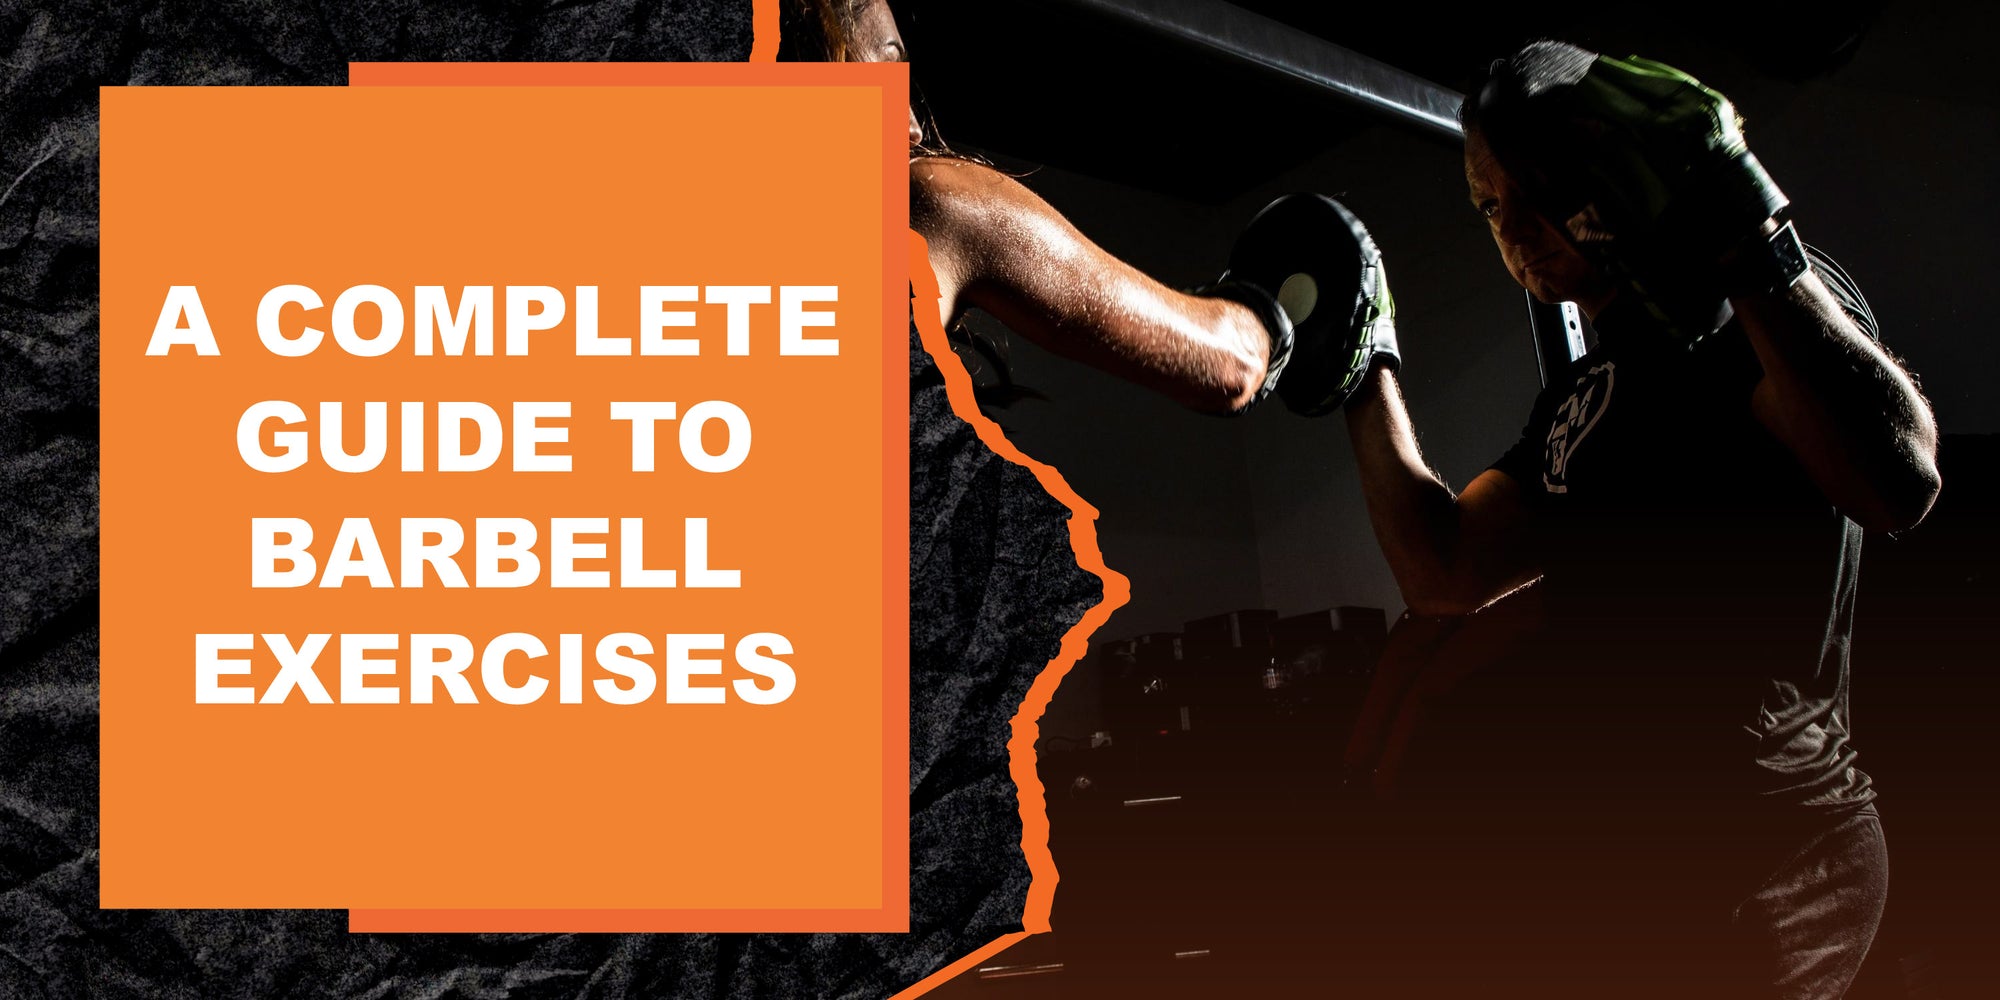 A Complete Guide to Barbell Exercises